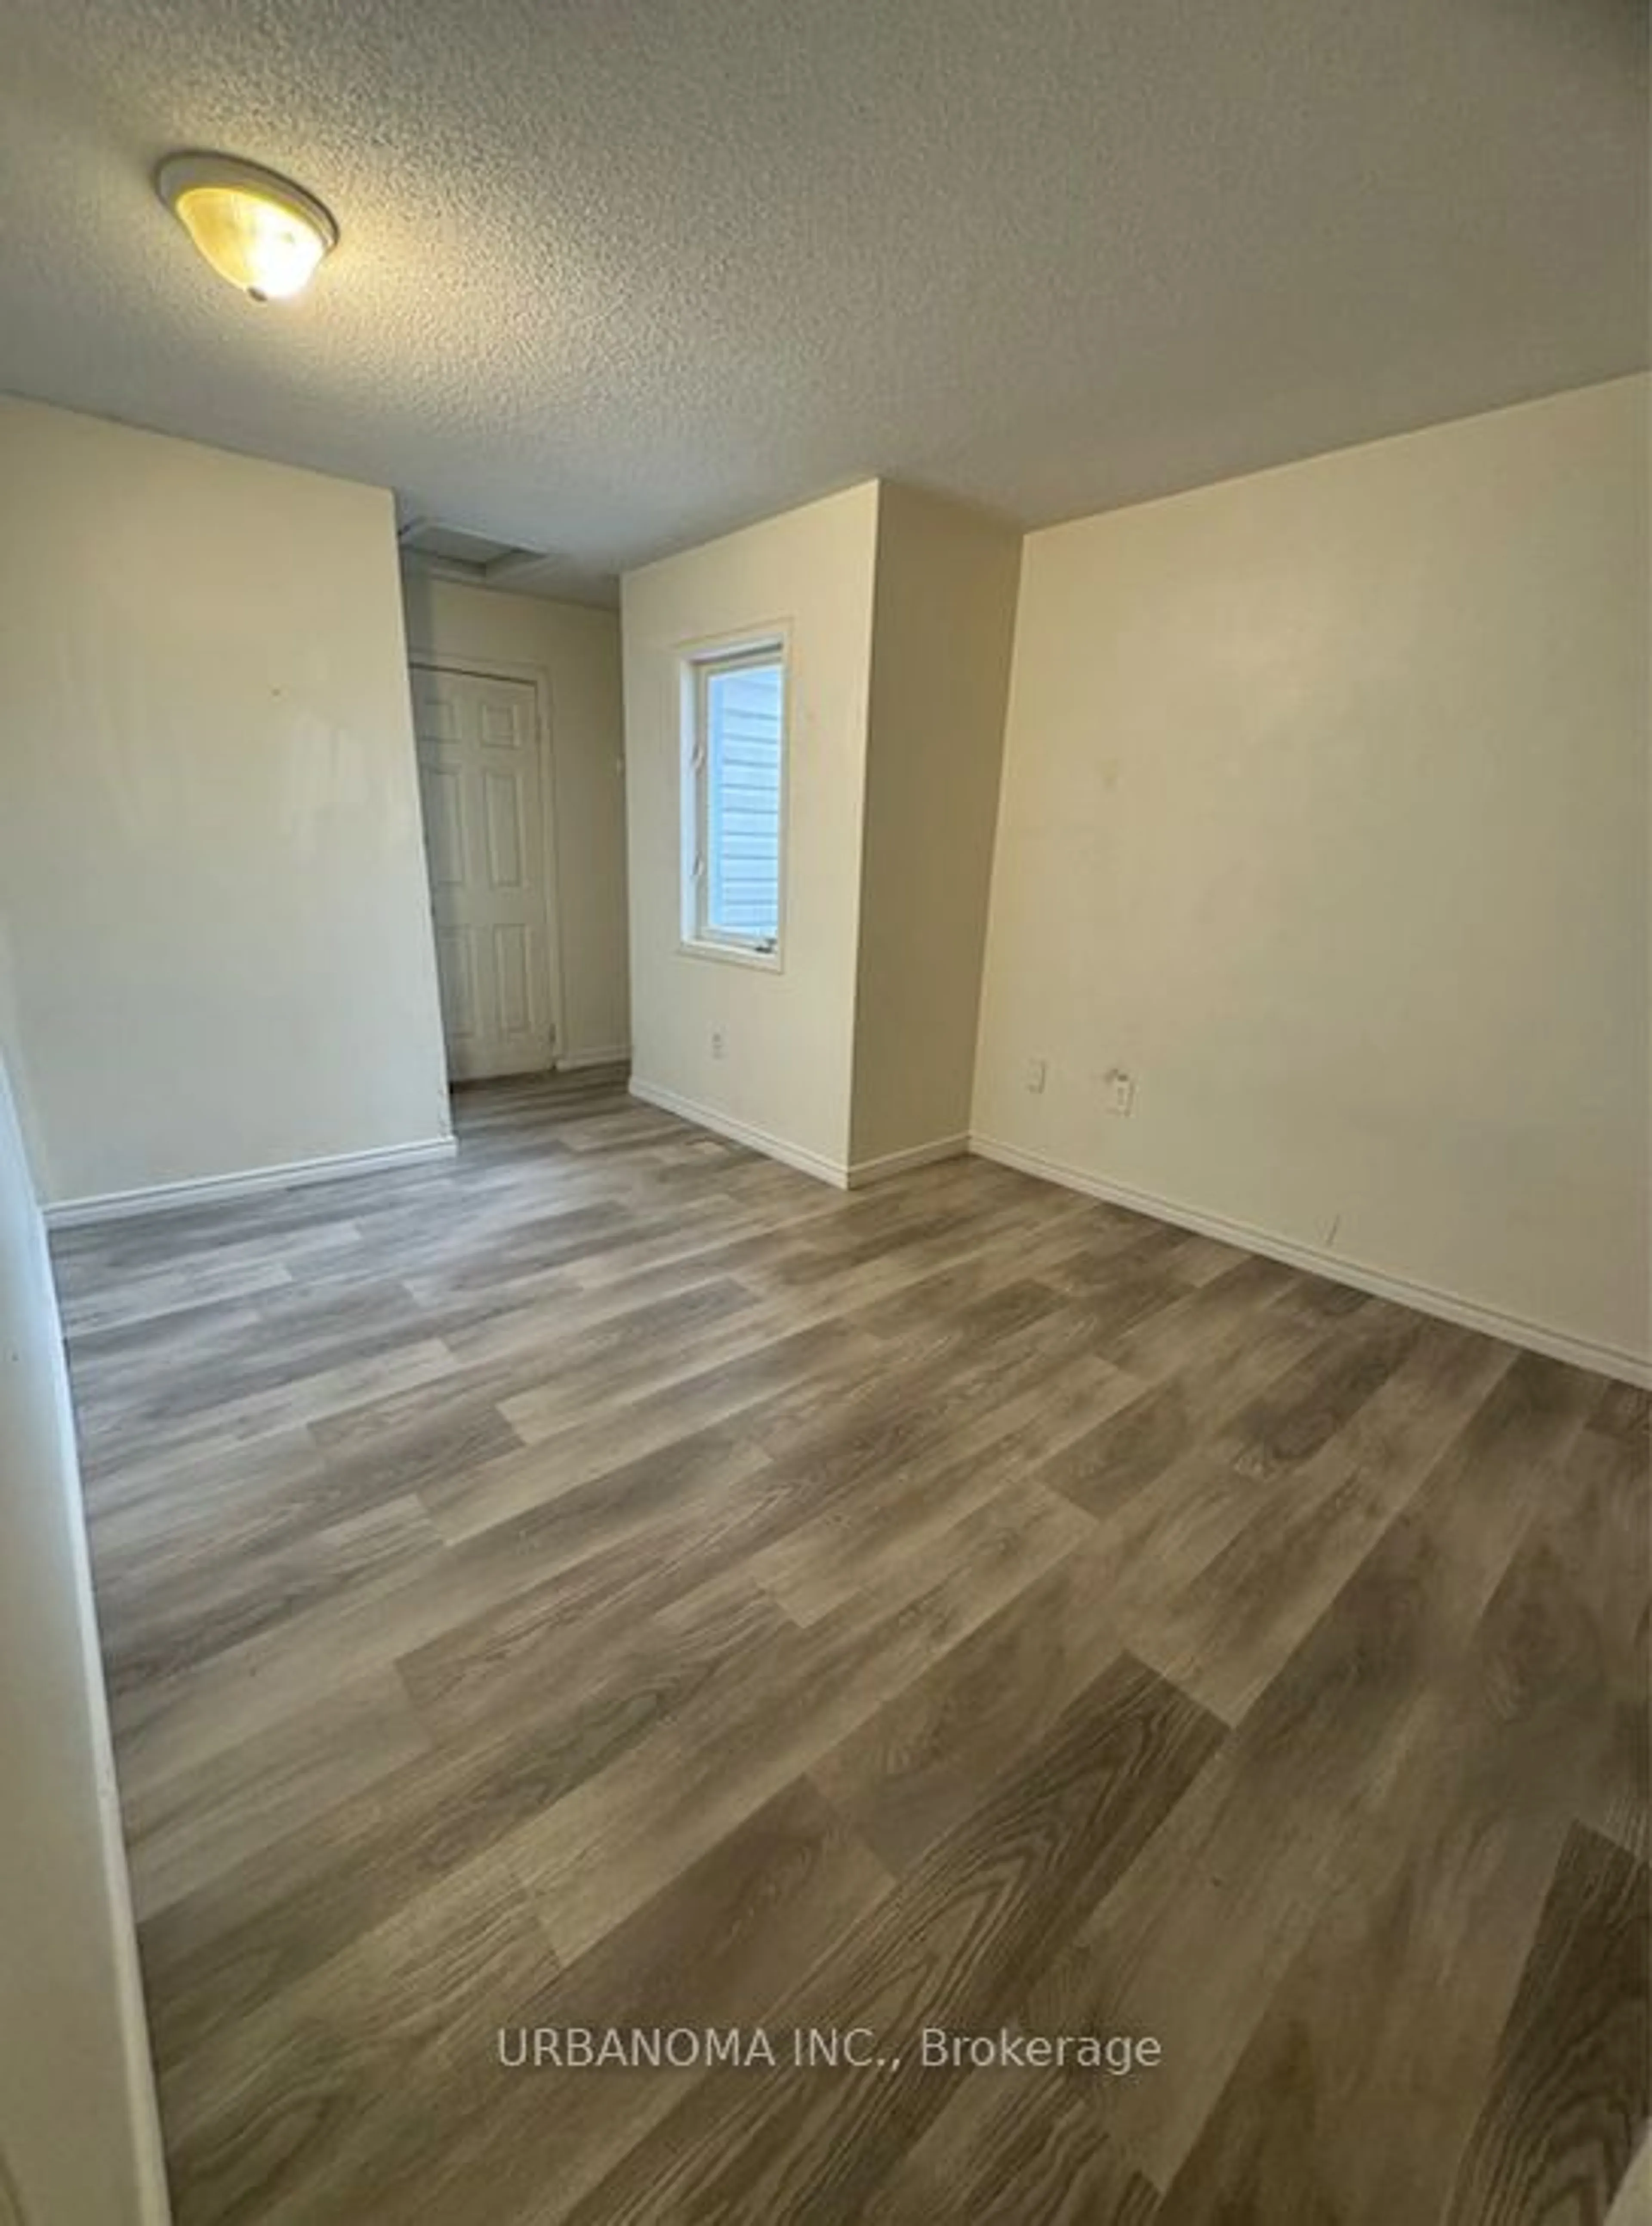 A pic of a room for 558 Sentinel Rd, Toronto Ontario M3J 3R9